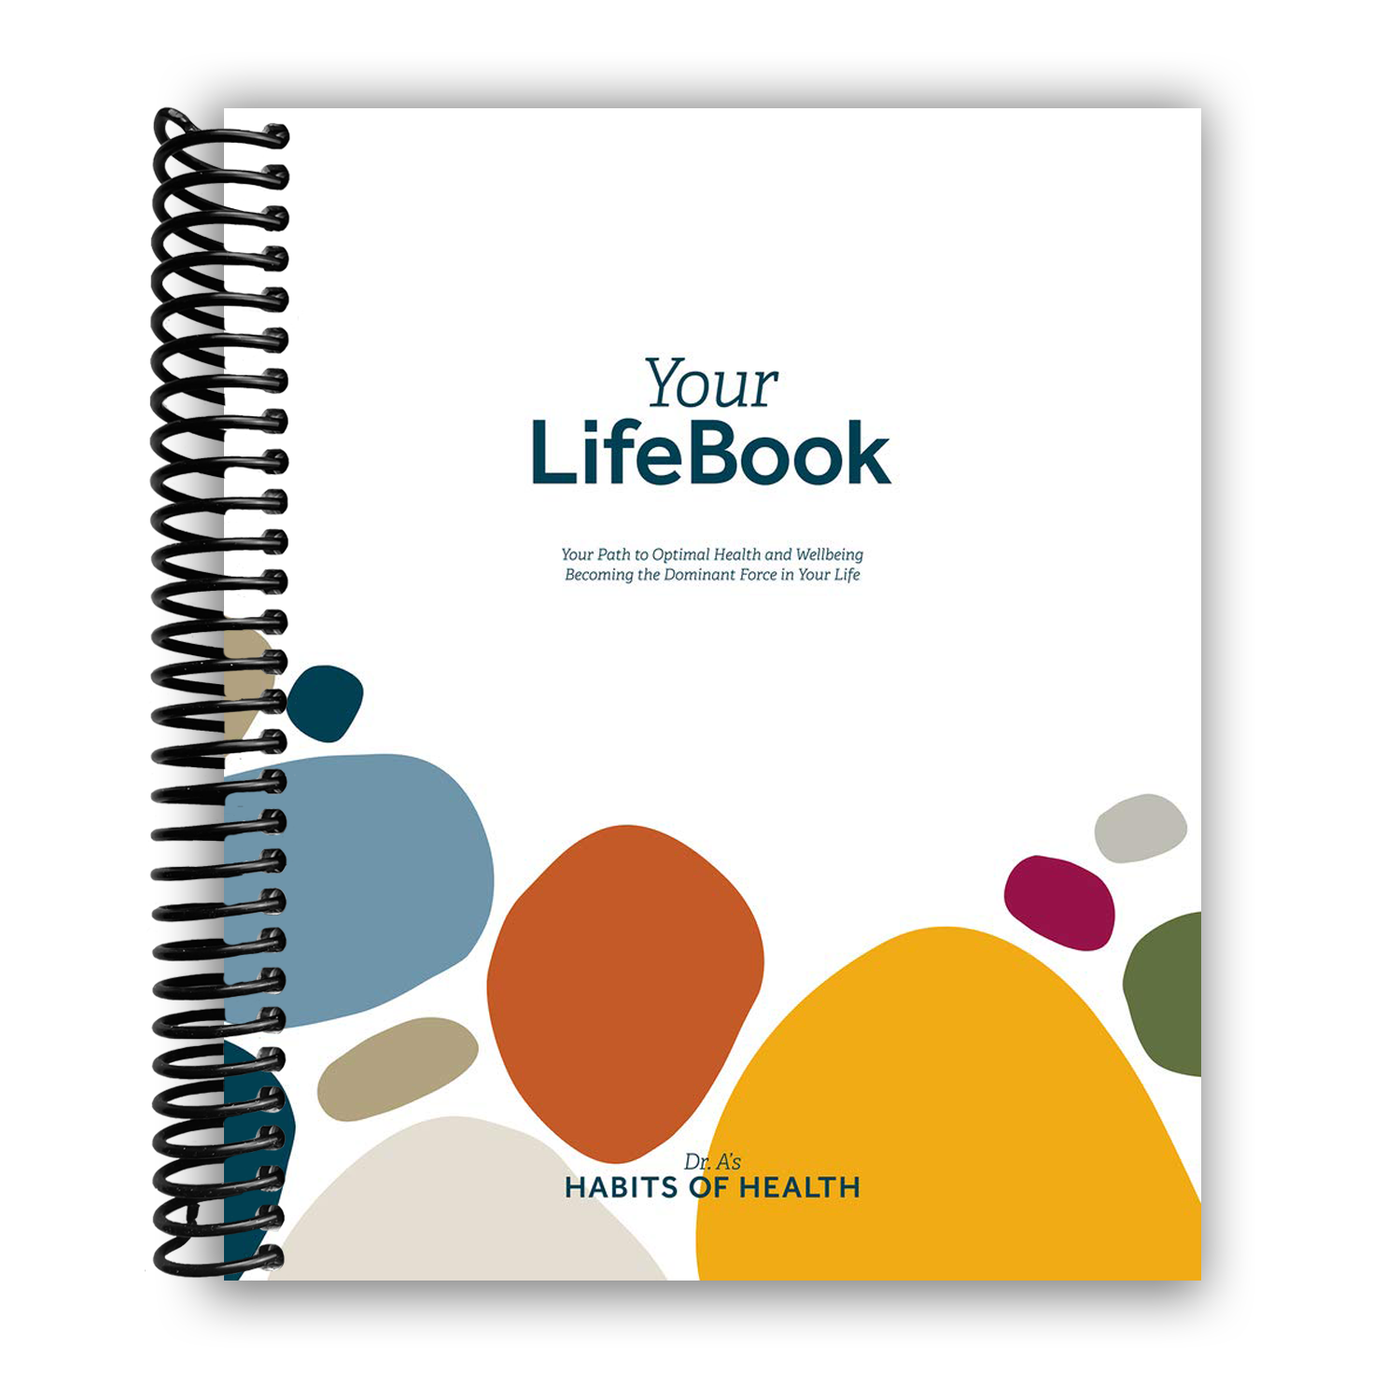 Your LifeBook: Your Path to Optimal Health and Wellbeing, Becoming the Dominant Force in Your Life(Spiral bound)